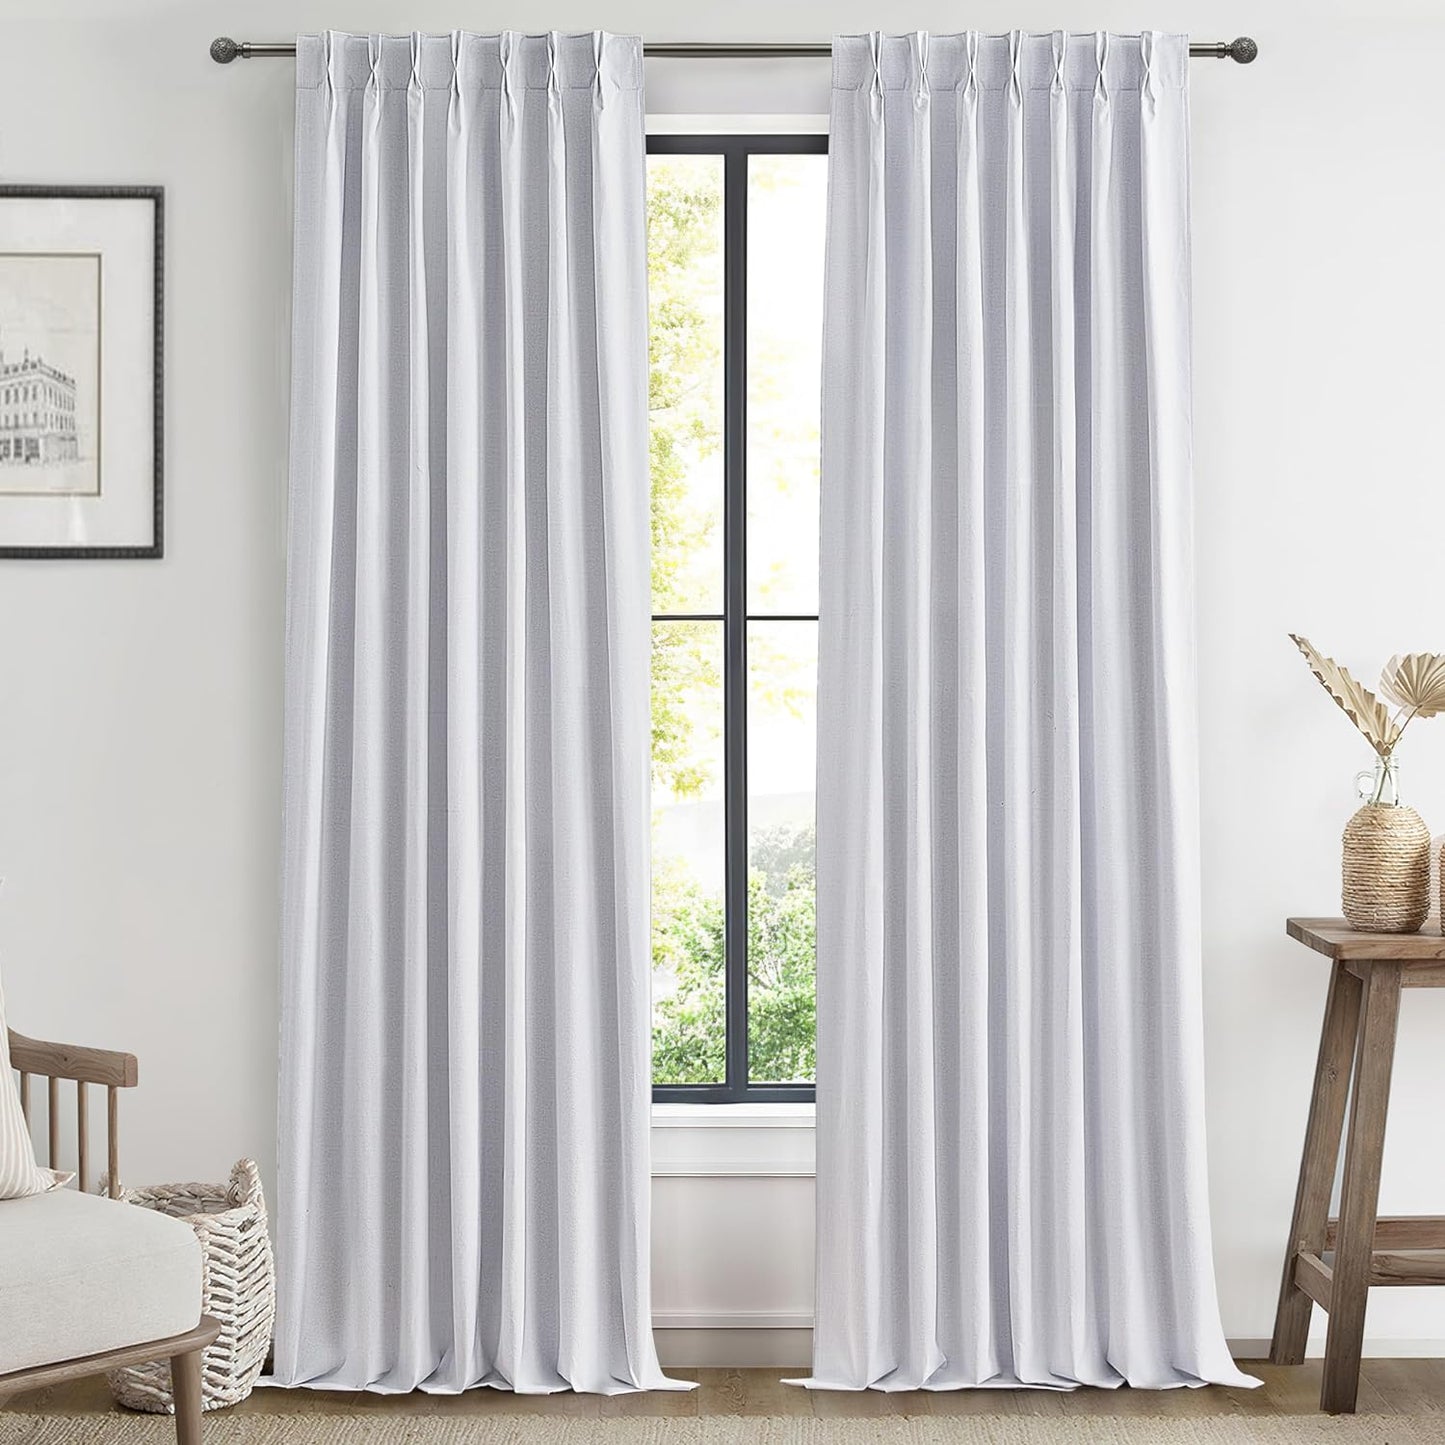 Natural Linen Pinch Pleated Blackout Curtains & Drapes 96 Inch Long Bedroom/Livingroom Farmhouse Curtains 2 Panel Sets, Neutral Track Room Darkening Thermal Insulated 8Ft Back Tab Window Curtain  QJmydeco Greyish White 40"W X 102"L X 2 Panels 